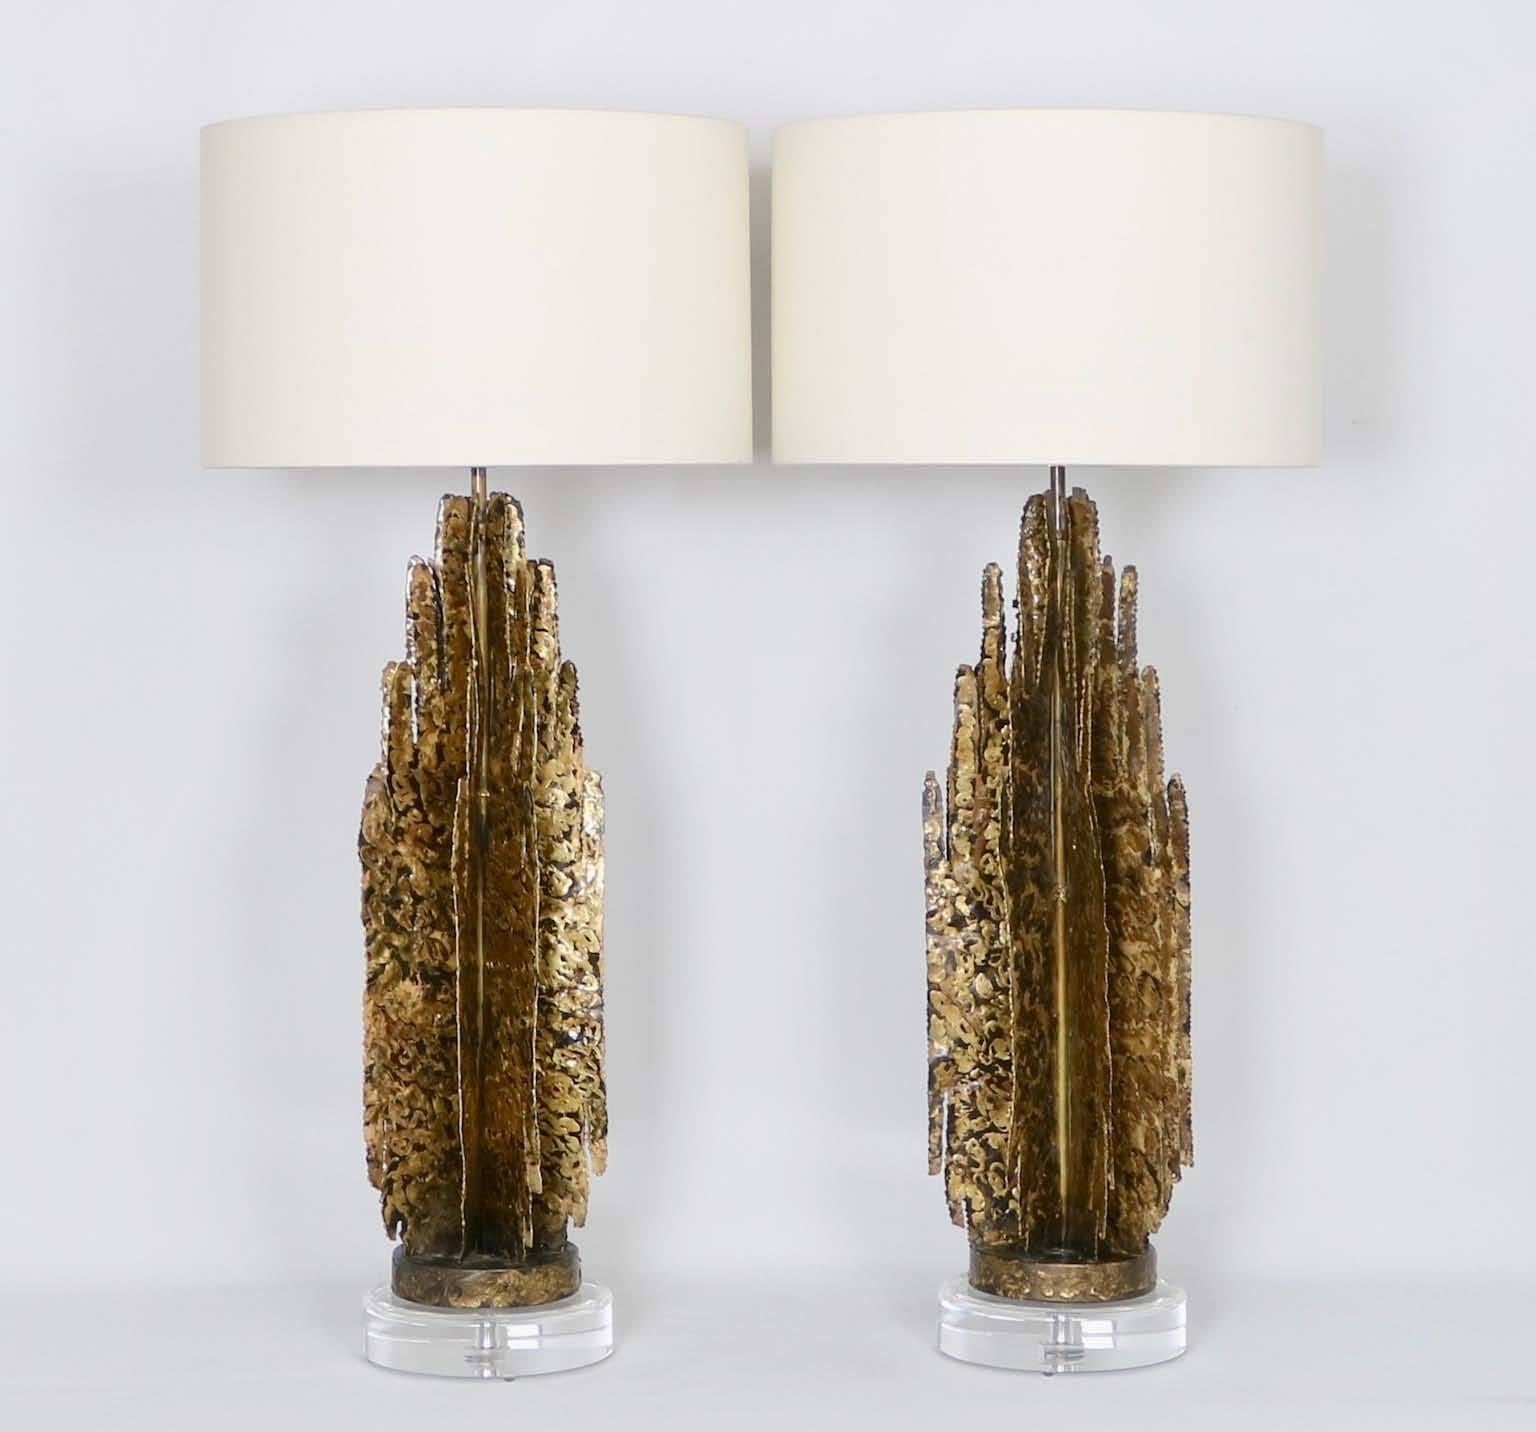 A pair of monumental Mid-Century Modern Brutalist abstract sculptural table lamps in the manner of Paul Evans, crafted of gilded tole with Lucite bases. The noted height is to the finial, the height to the top of the sculpture body is 29 in.